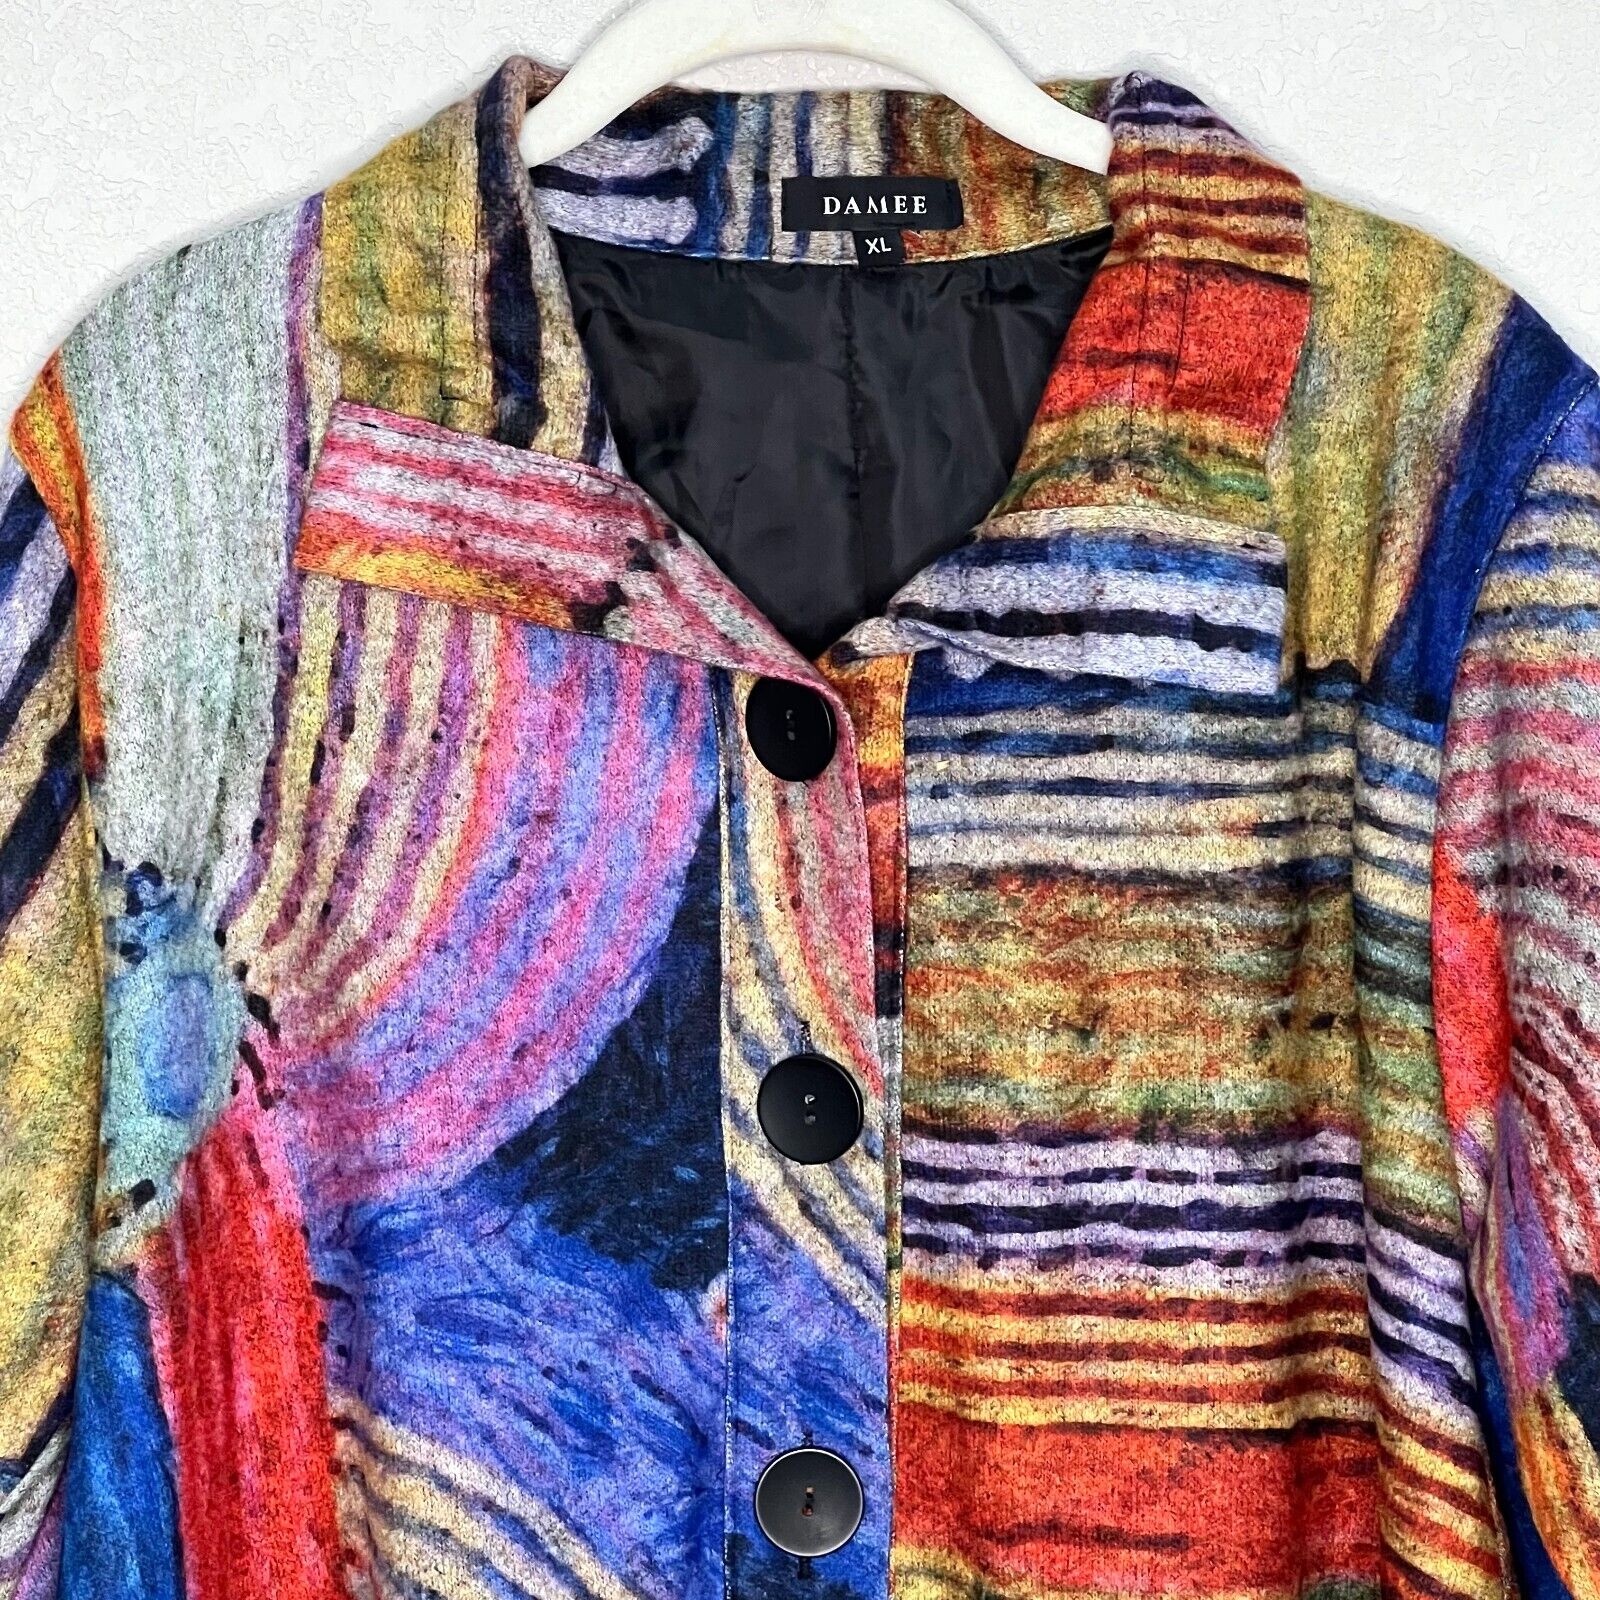 DAMEE Inc Vibrant Abstract Art to Wear Collared Swing Jacket Top Size XL